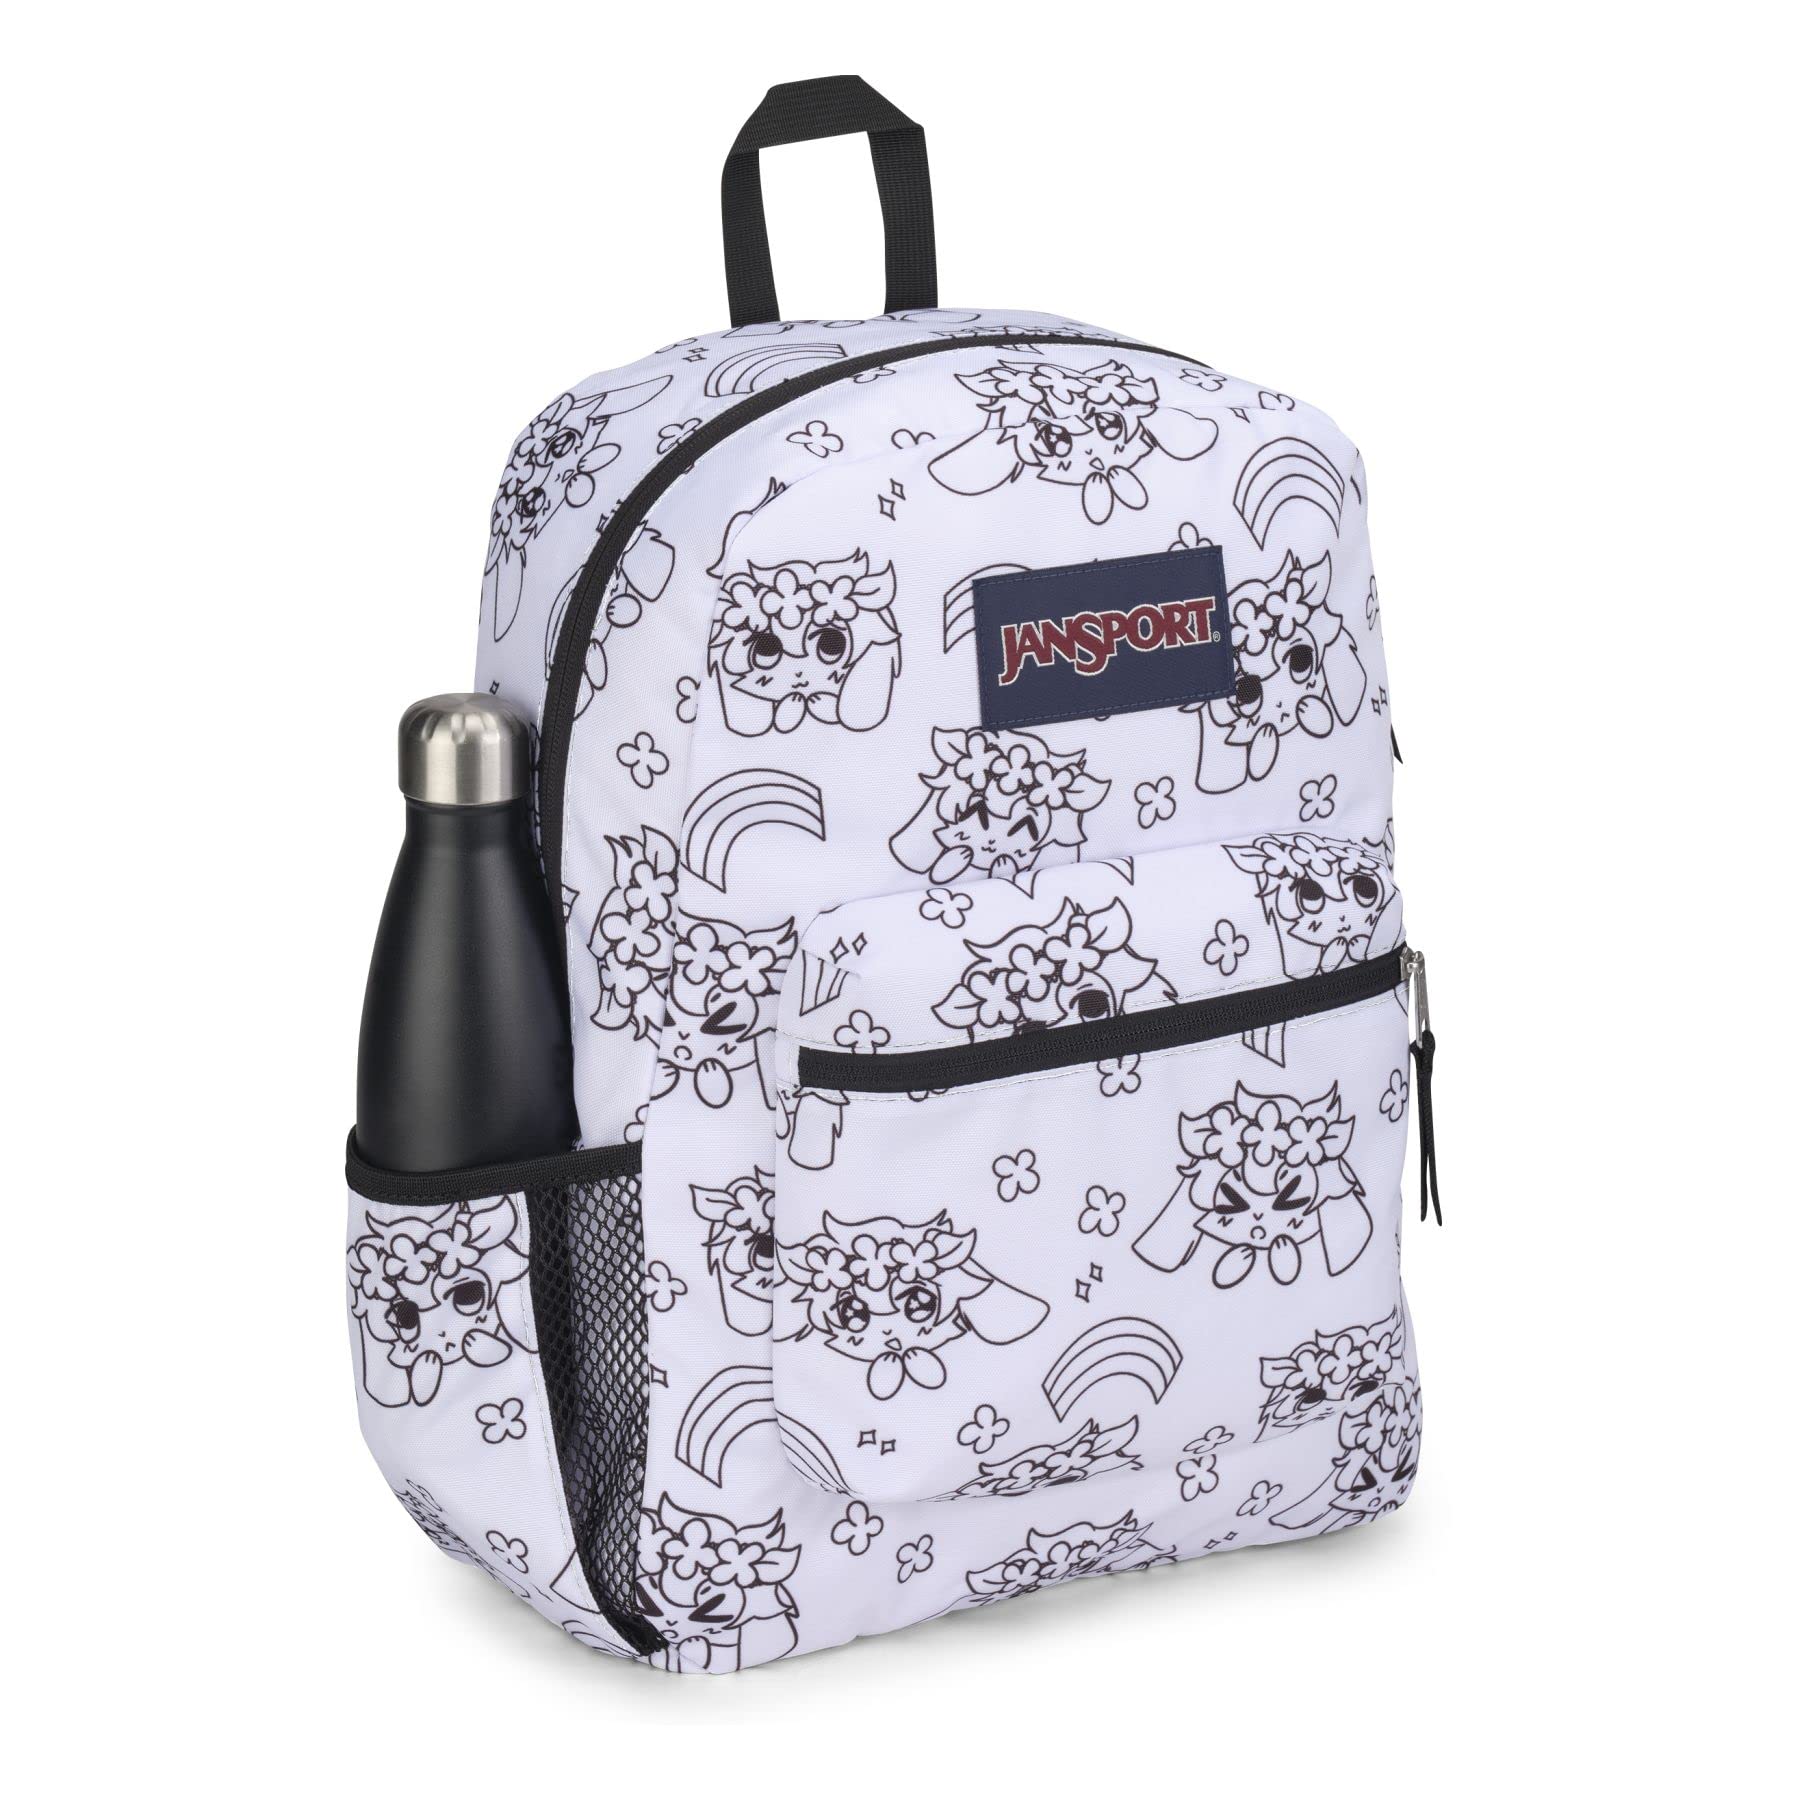 JanSport Cross Town Backpack, Anime Emotions, One Size